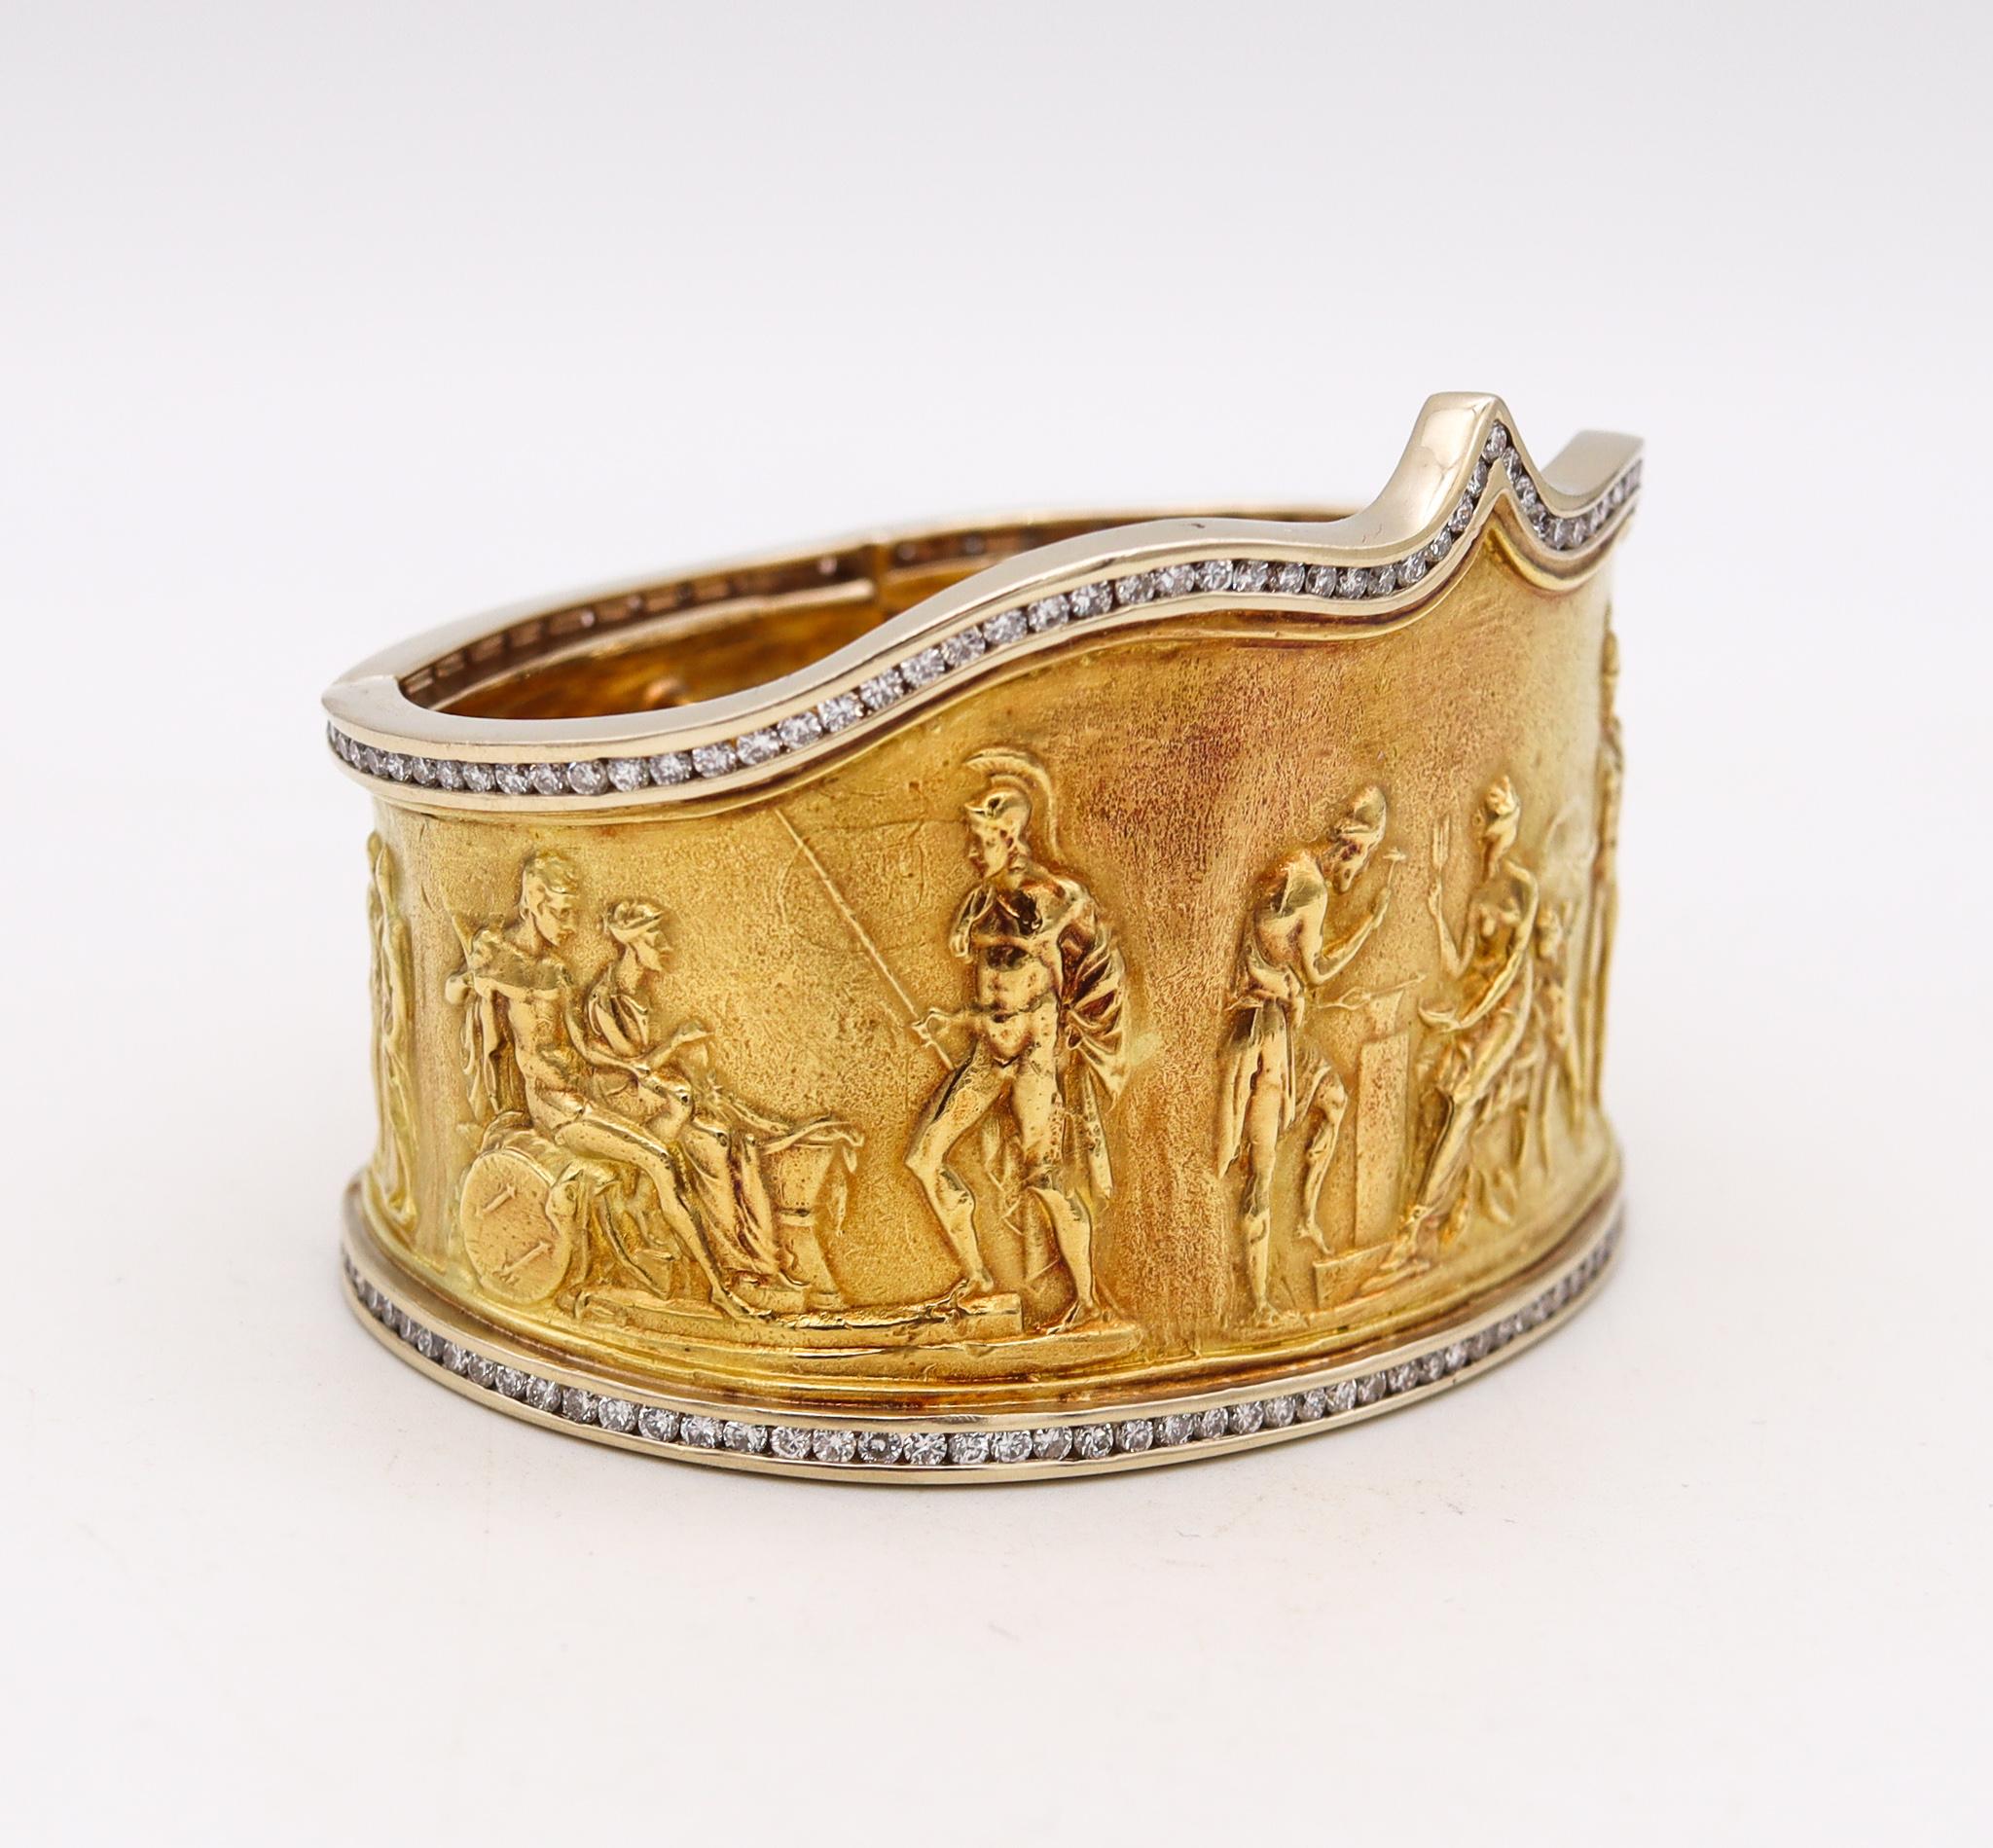 Greek revival motif bracelet designed by SeidenGang.

Magnificent vintage solid piece, made by the jewelry designer's SeidenGang. This rare early bracelet was part of the iconic Etruscan-Roman revivals collection and was carefully crafted in solid